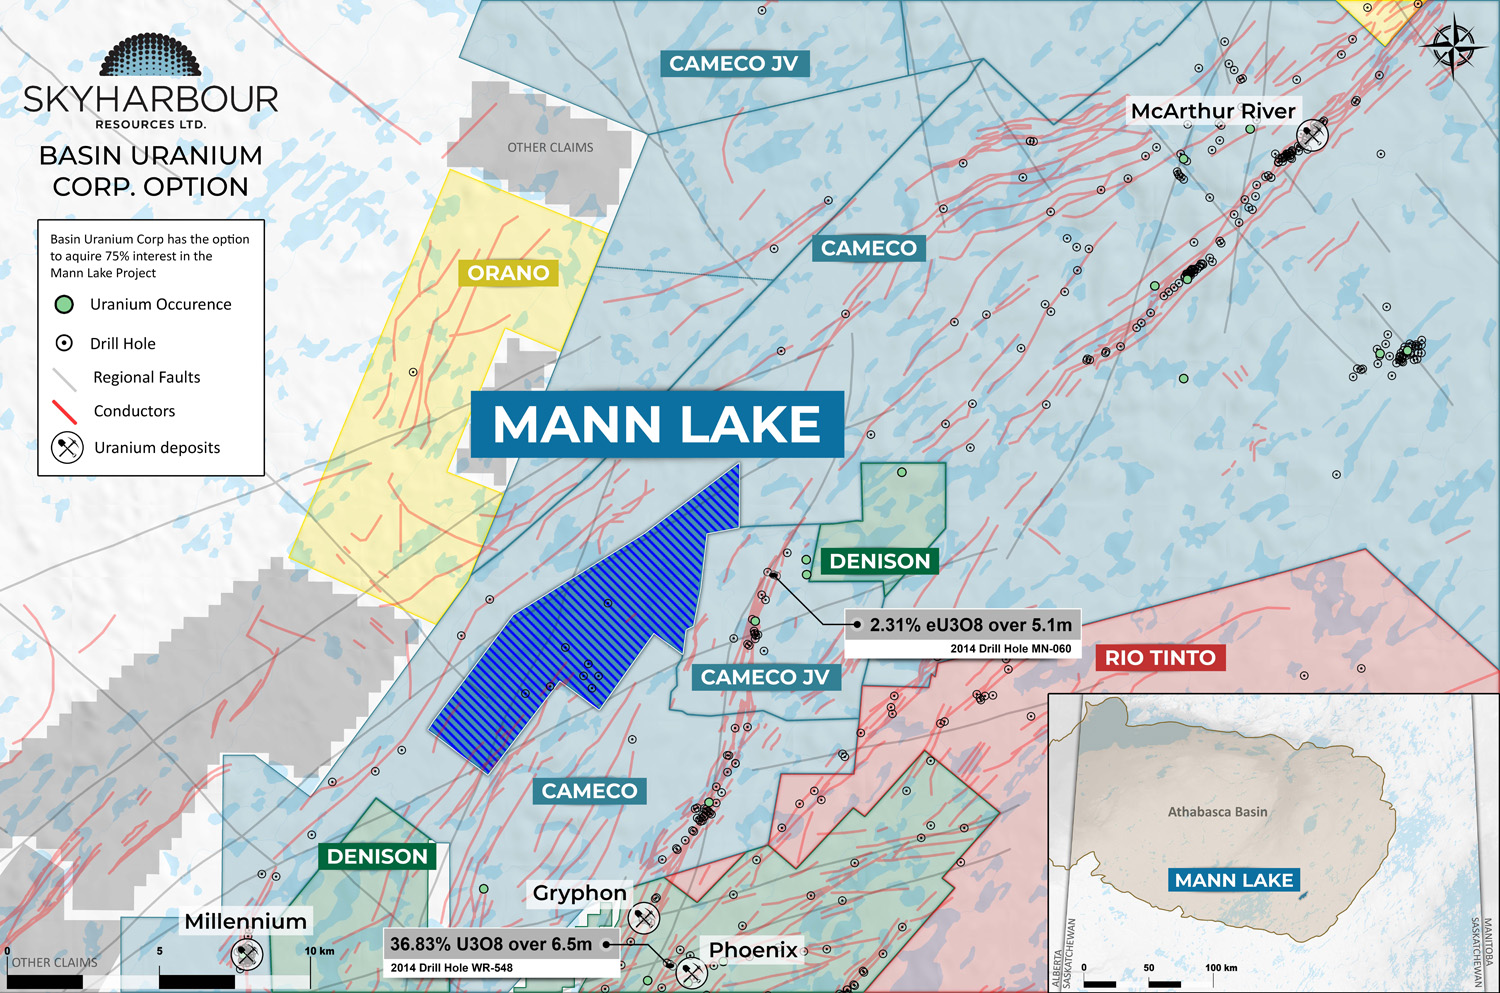 Skyharbour’s Partner Company Basin Uranium Corp. Receives Drill Permit for Mann Lake Uranium Project